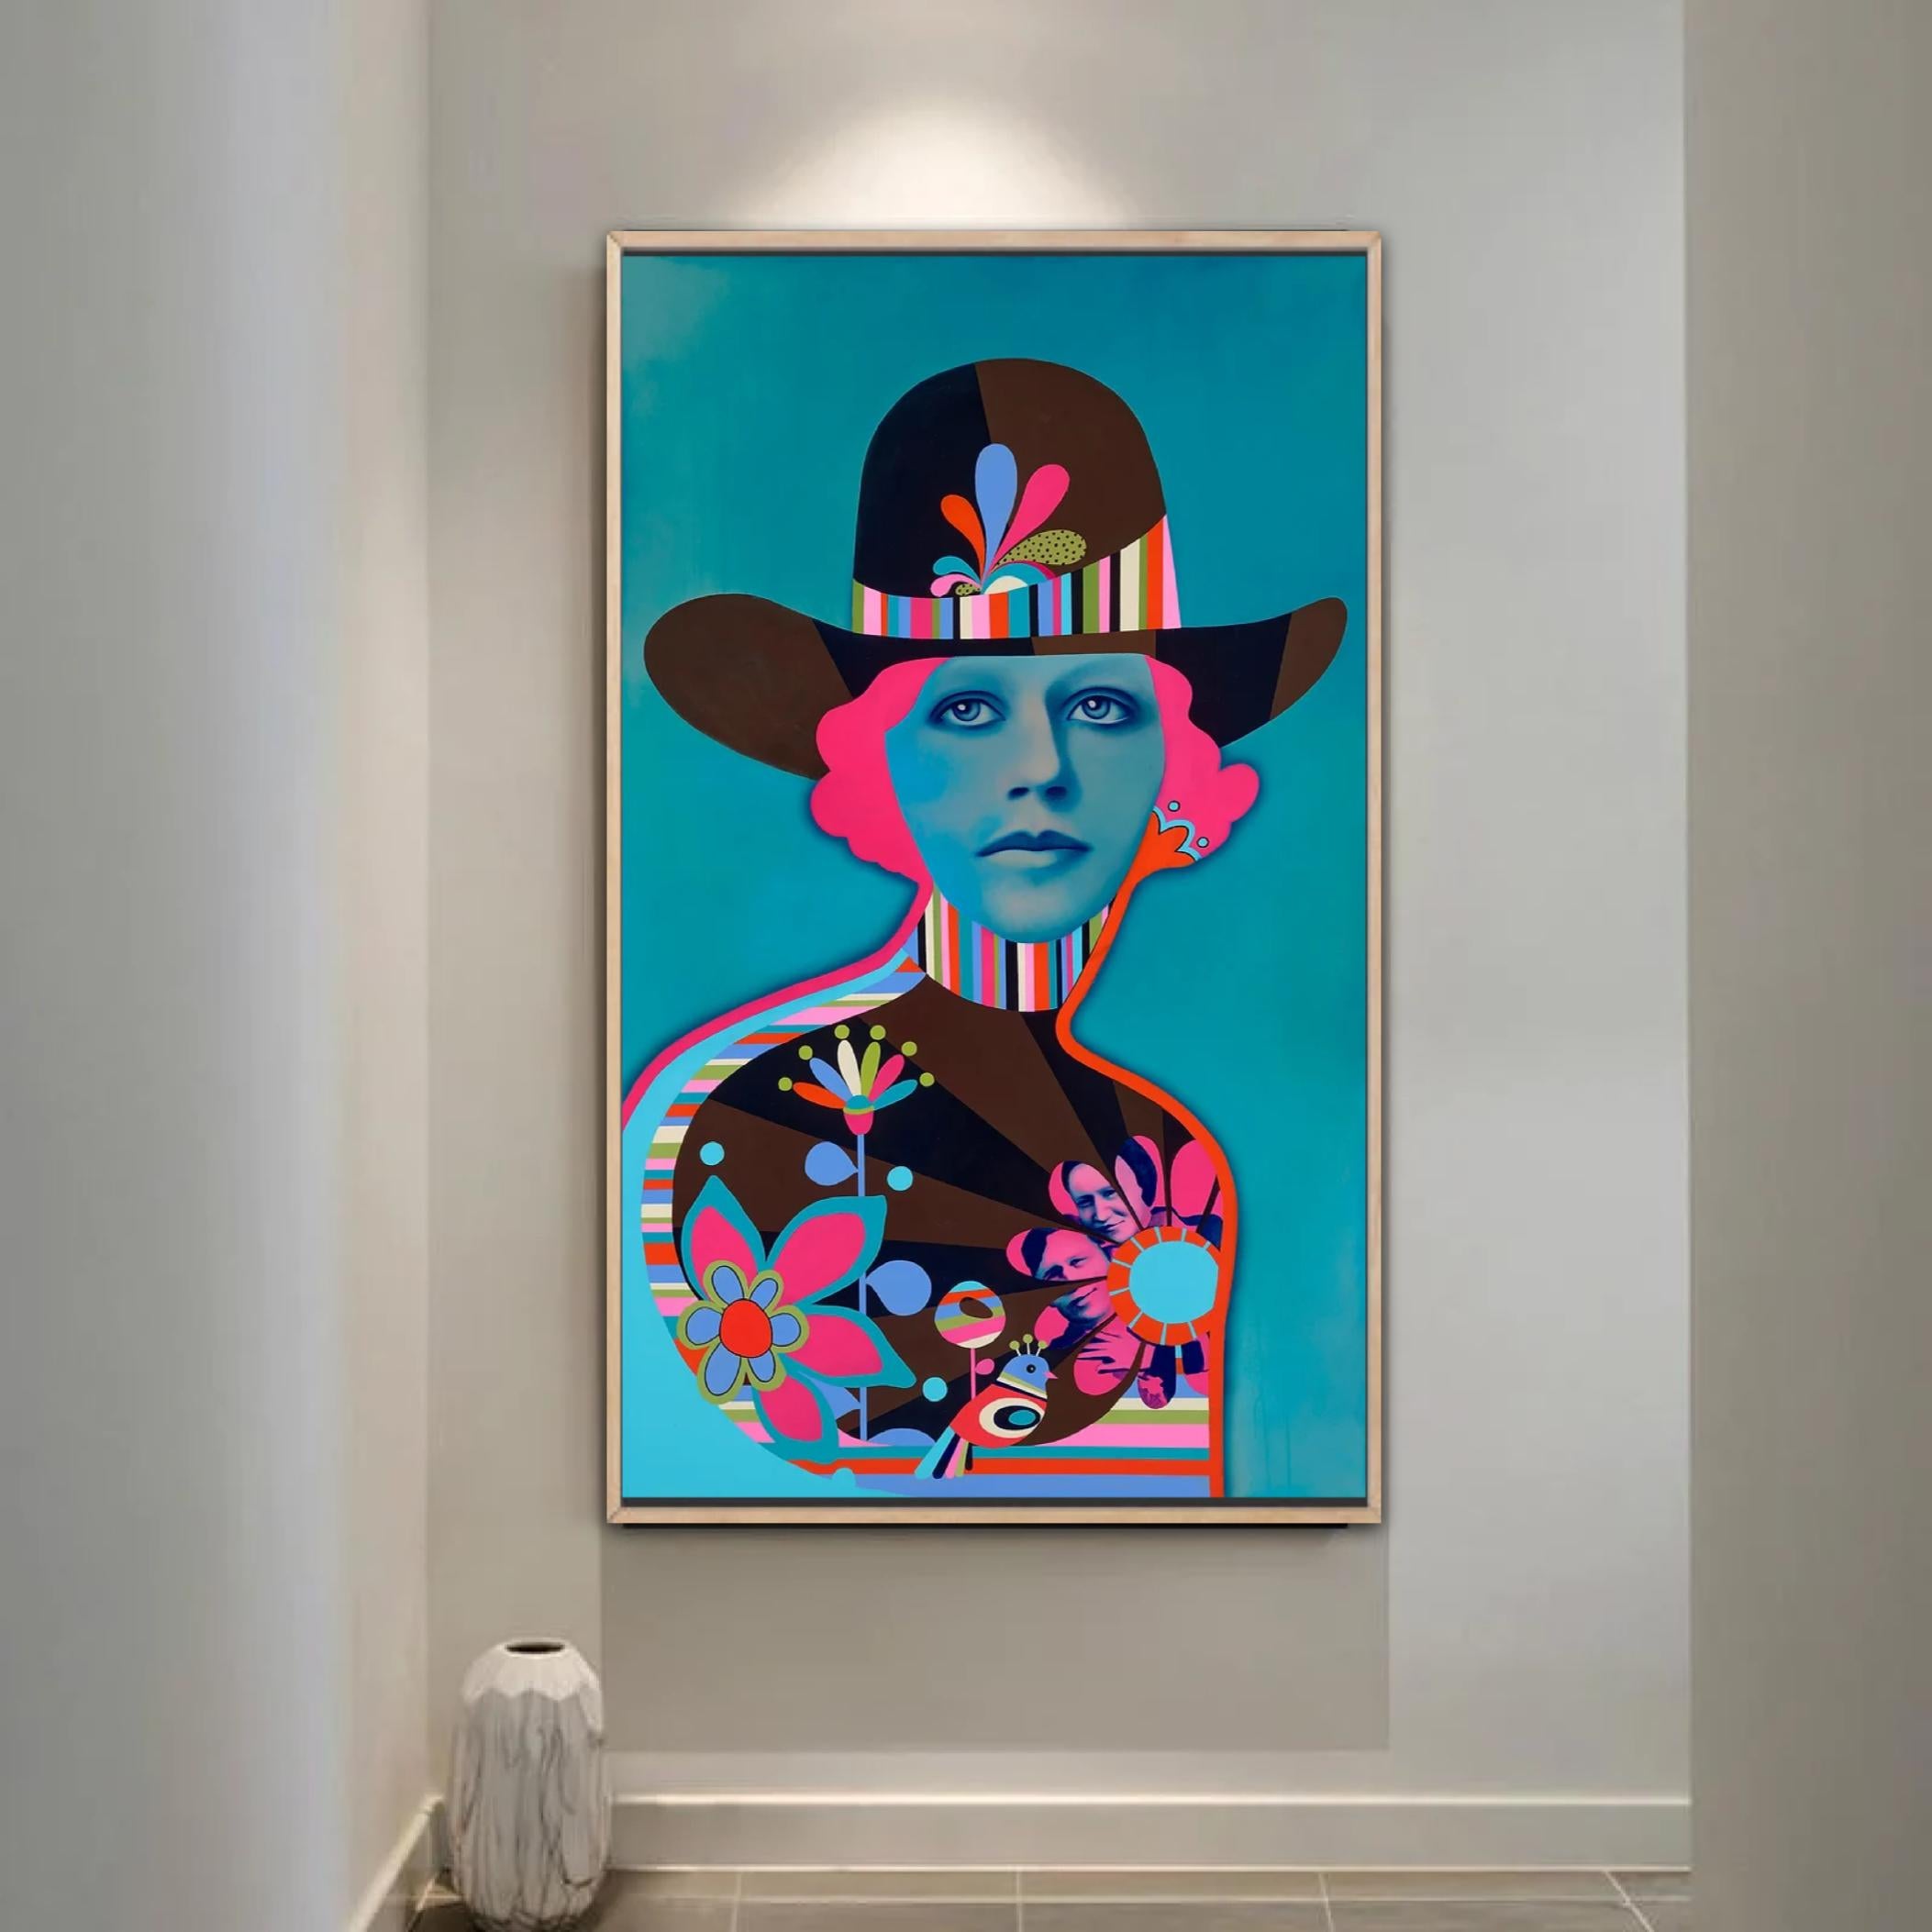 “Outlaw” is a bright and powerful painting with a fashionista female figure wearing a cowboy hat, and a bright colorful blue background. It is sure to be a feature piece in any space. Known for her richly evocative color palette and striking